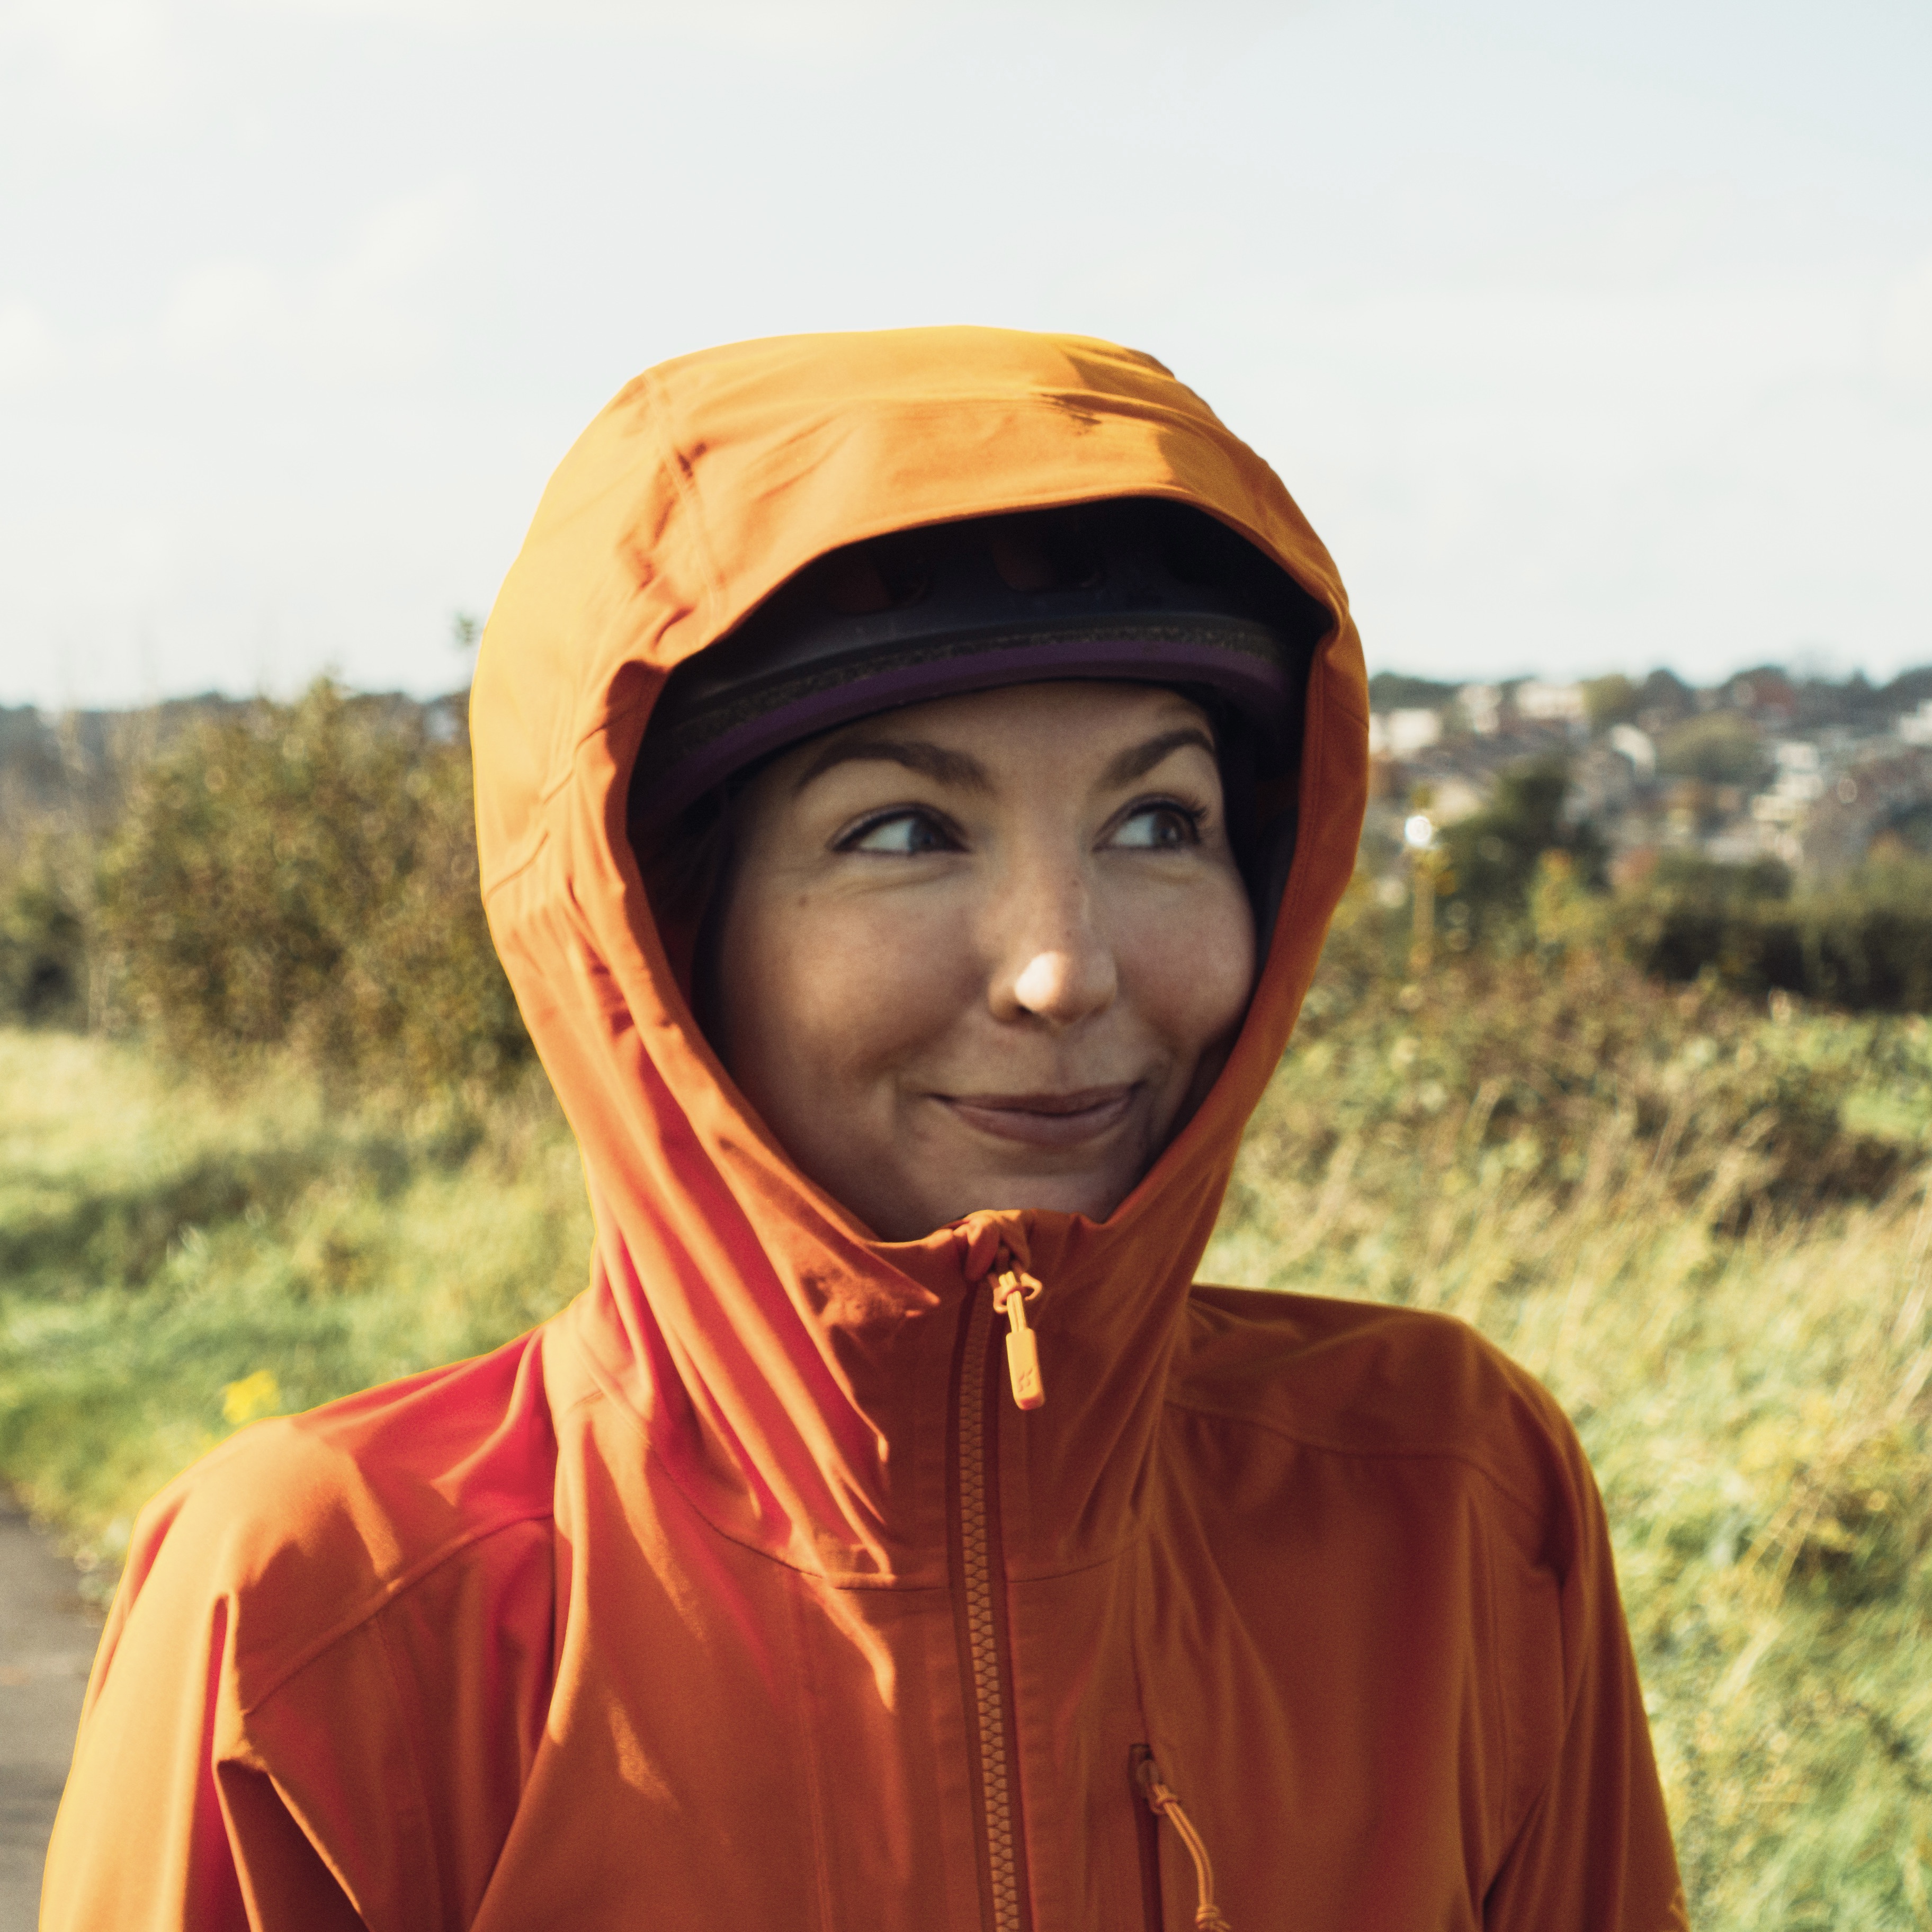 Maap Ascend Pro Rain Jacket Review: A compliment generator with a